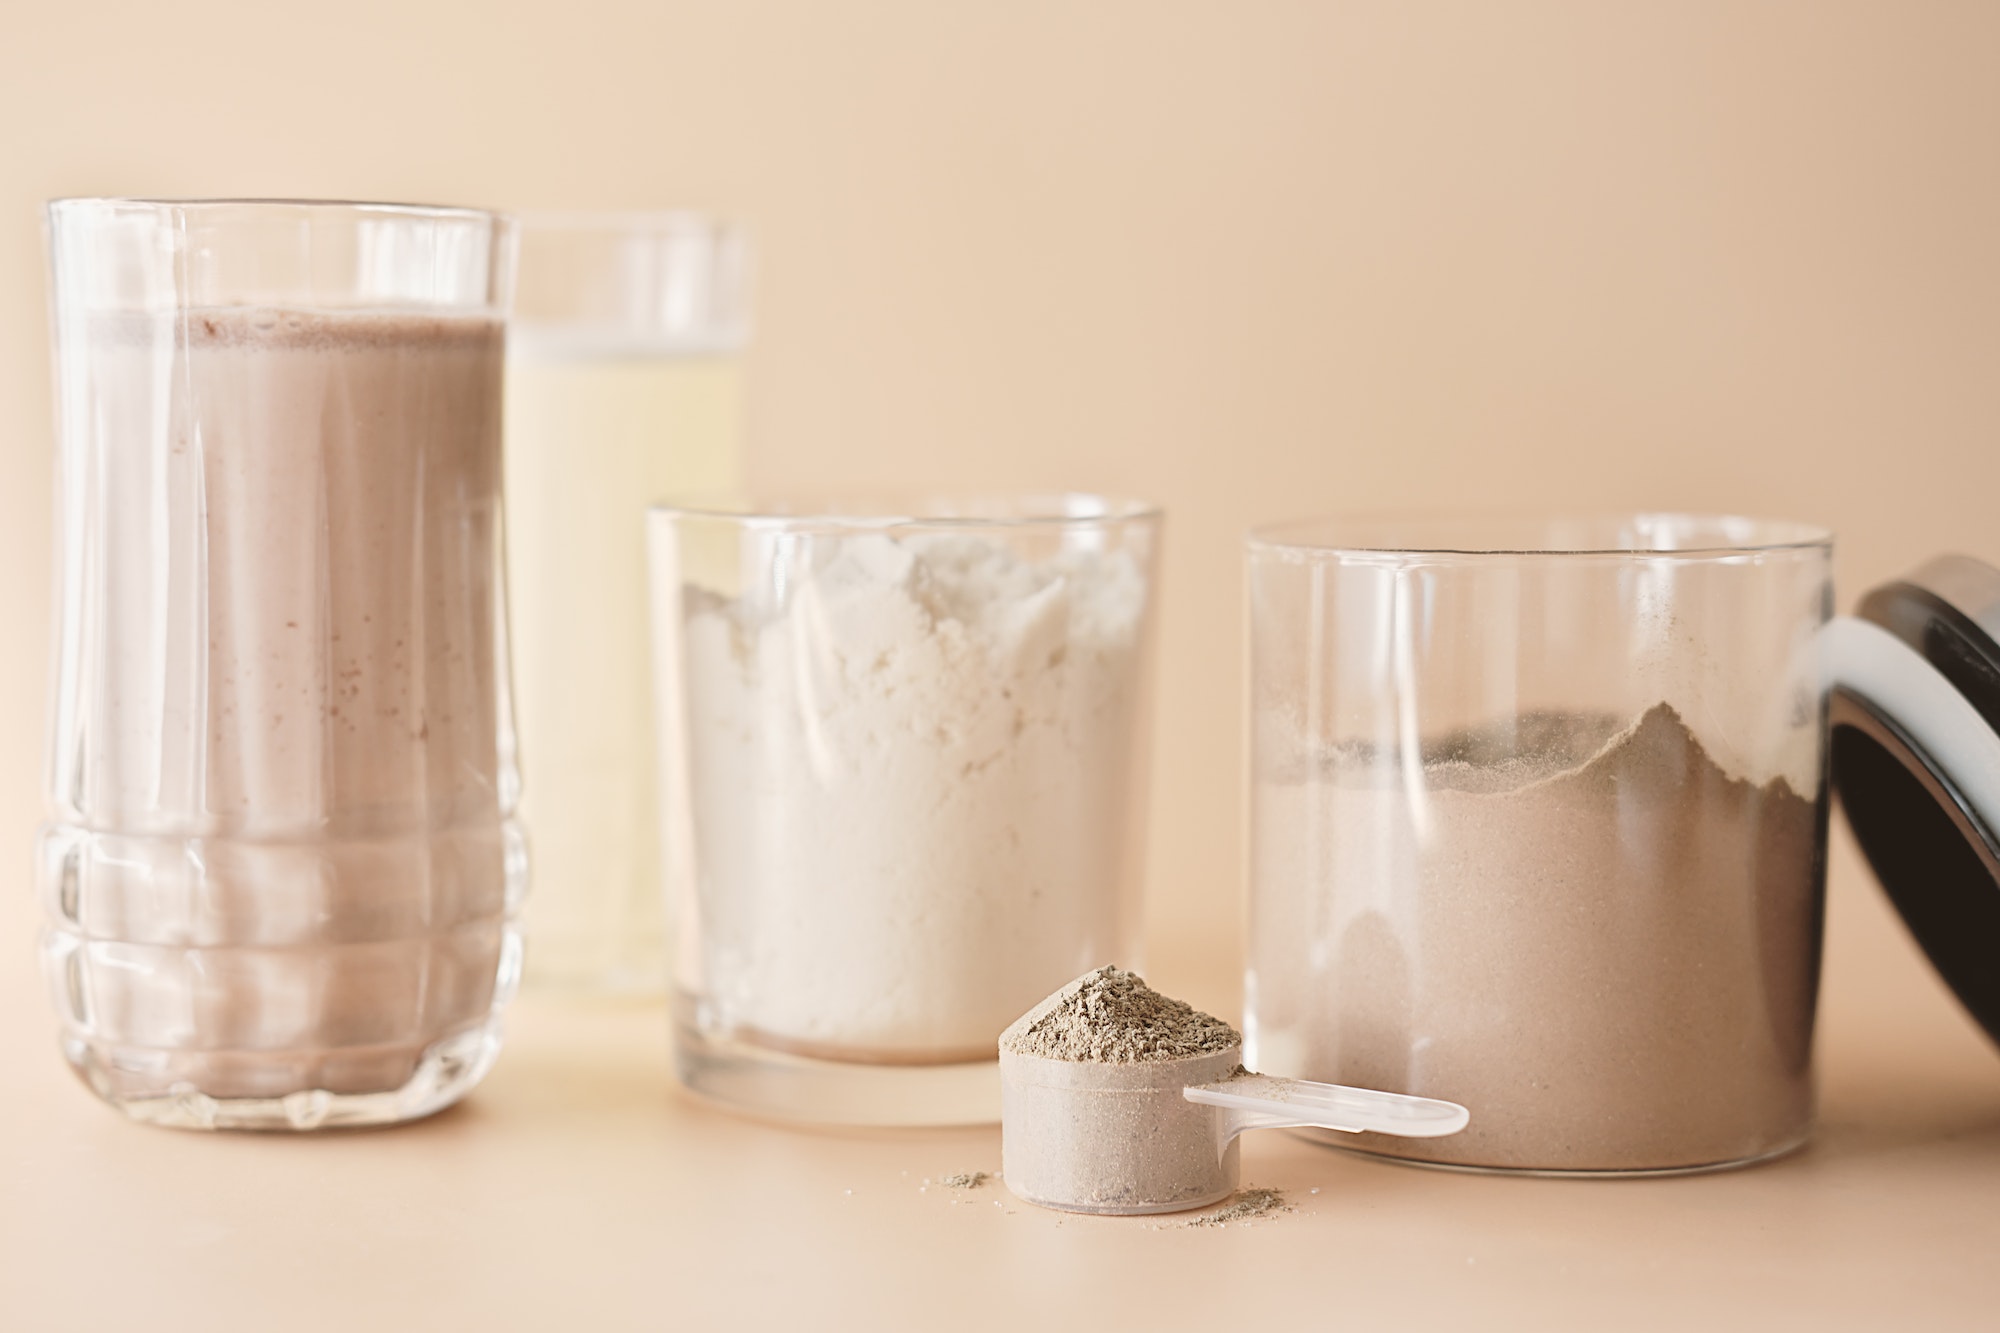 whey protein drink in a glass and jars with protein powder on beige background